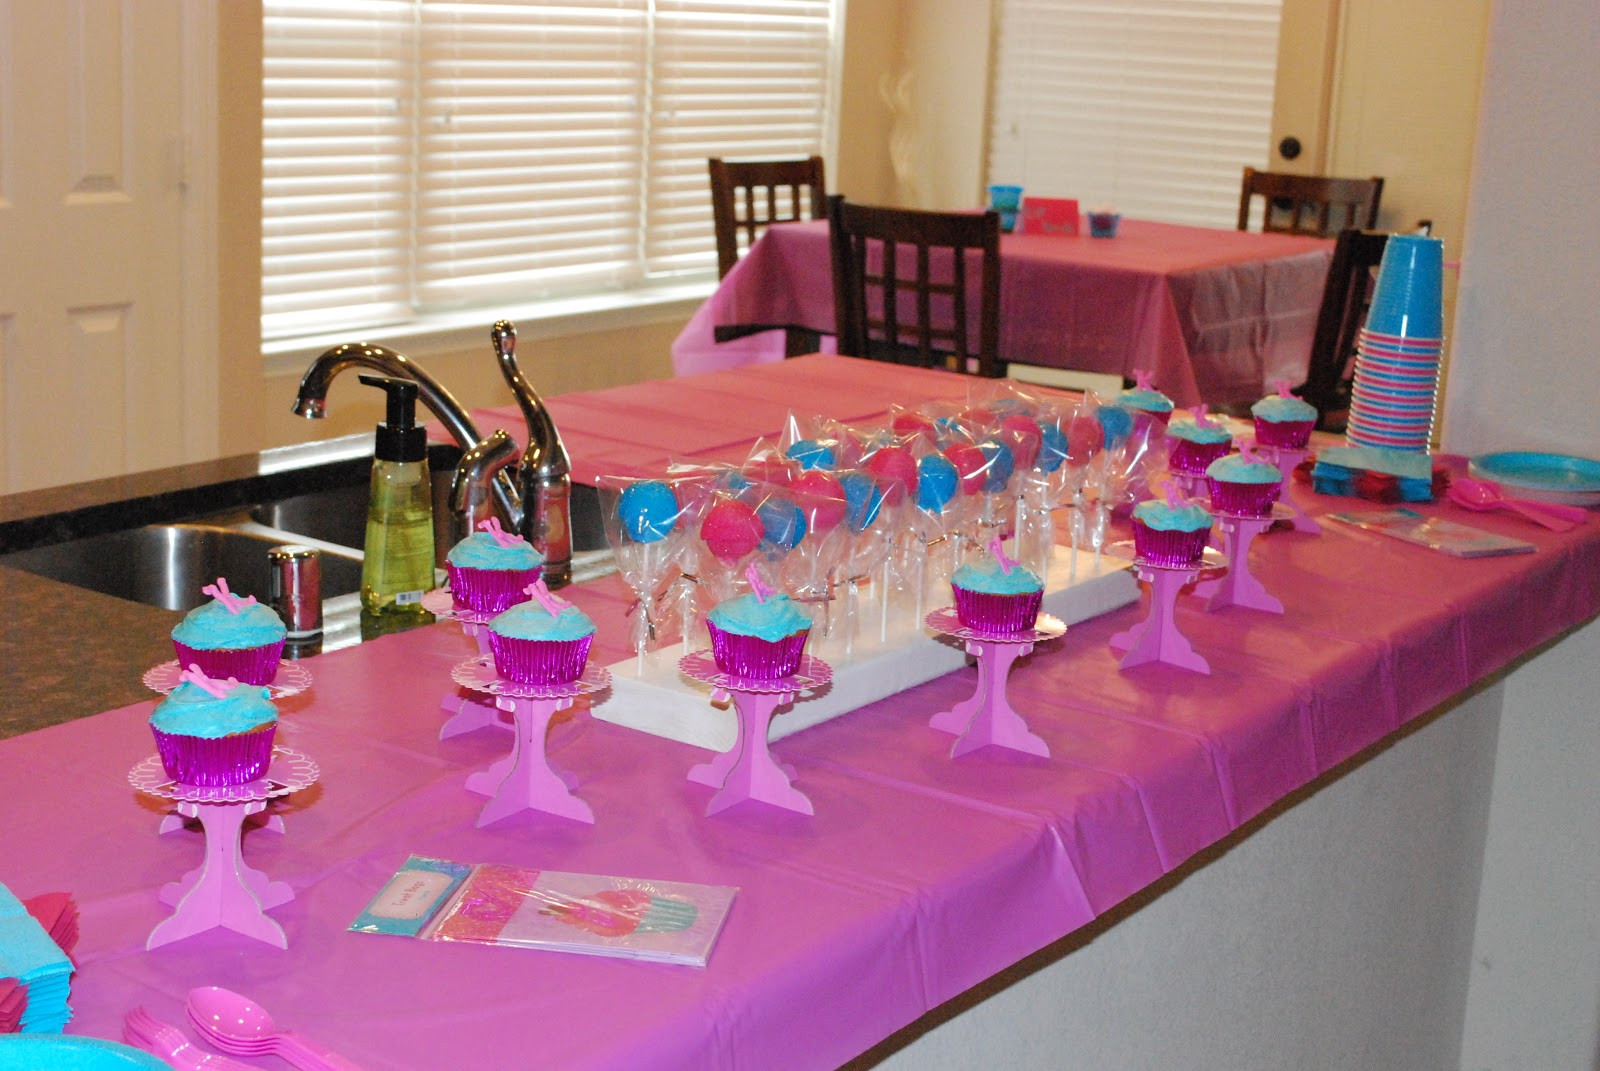 11 Year Girl Birthday Party Ideas
 The Simple Life SPArty Birthday Party for my 11 Year Old